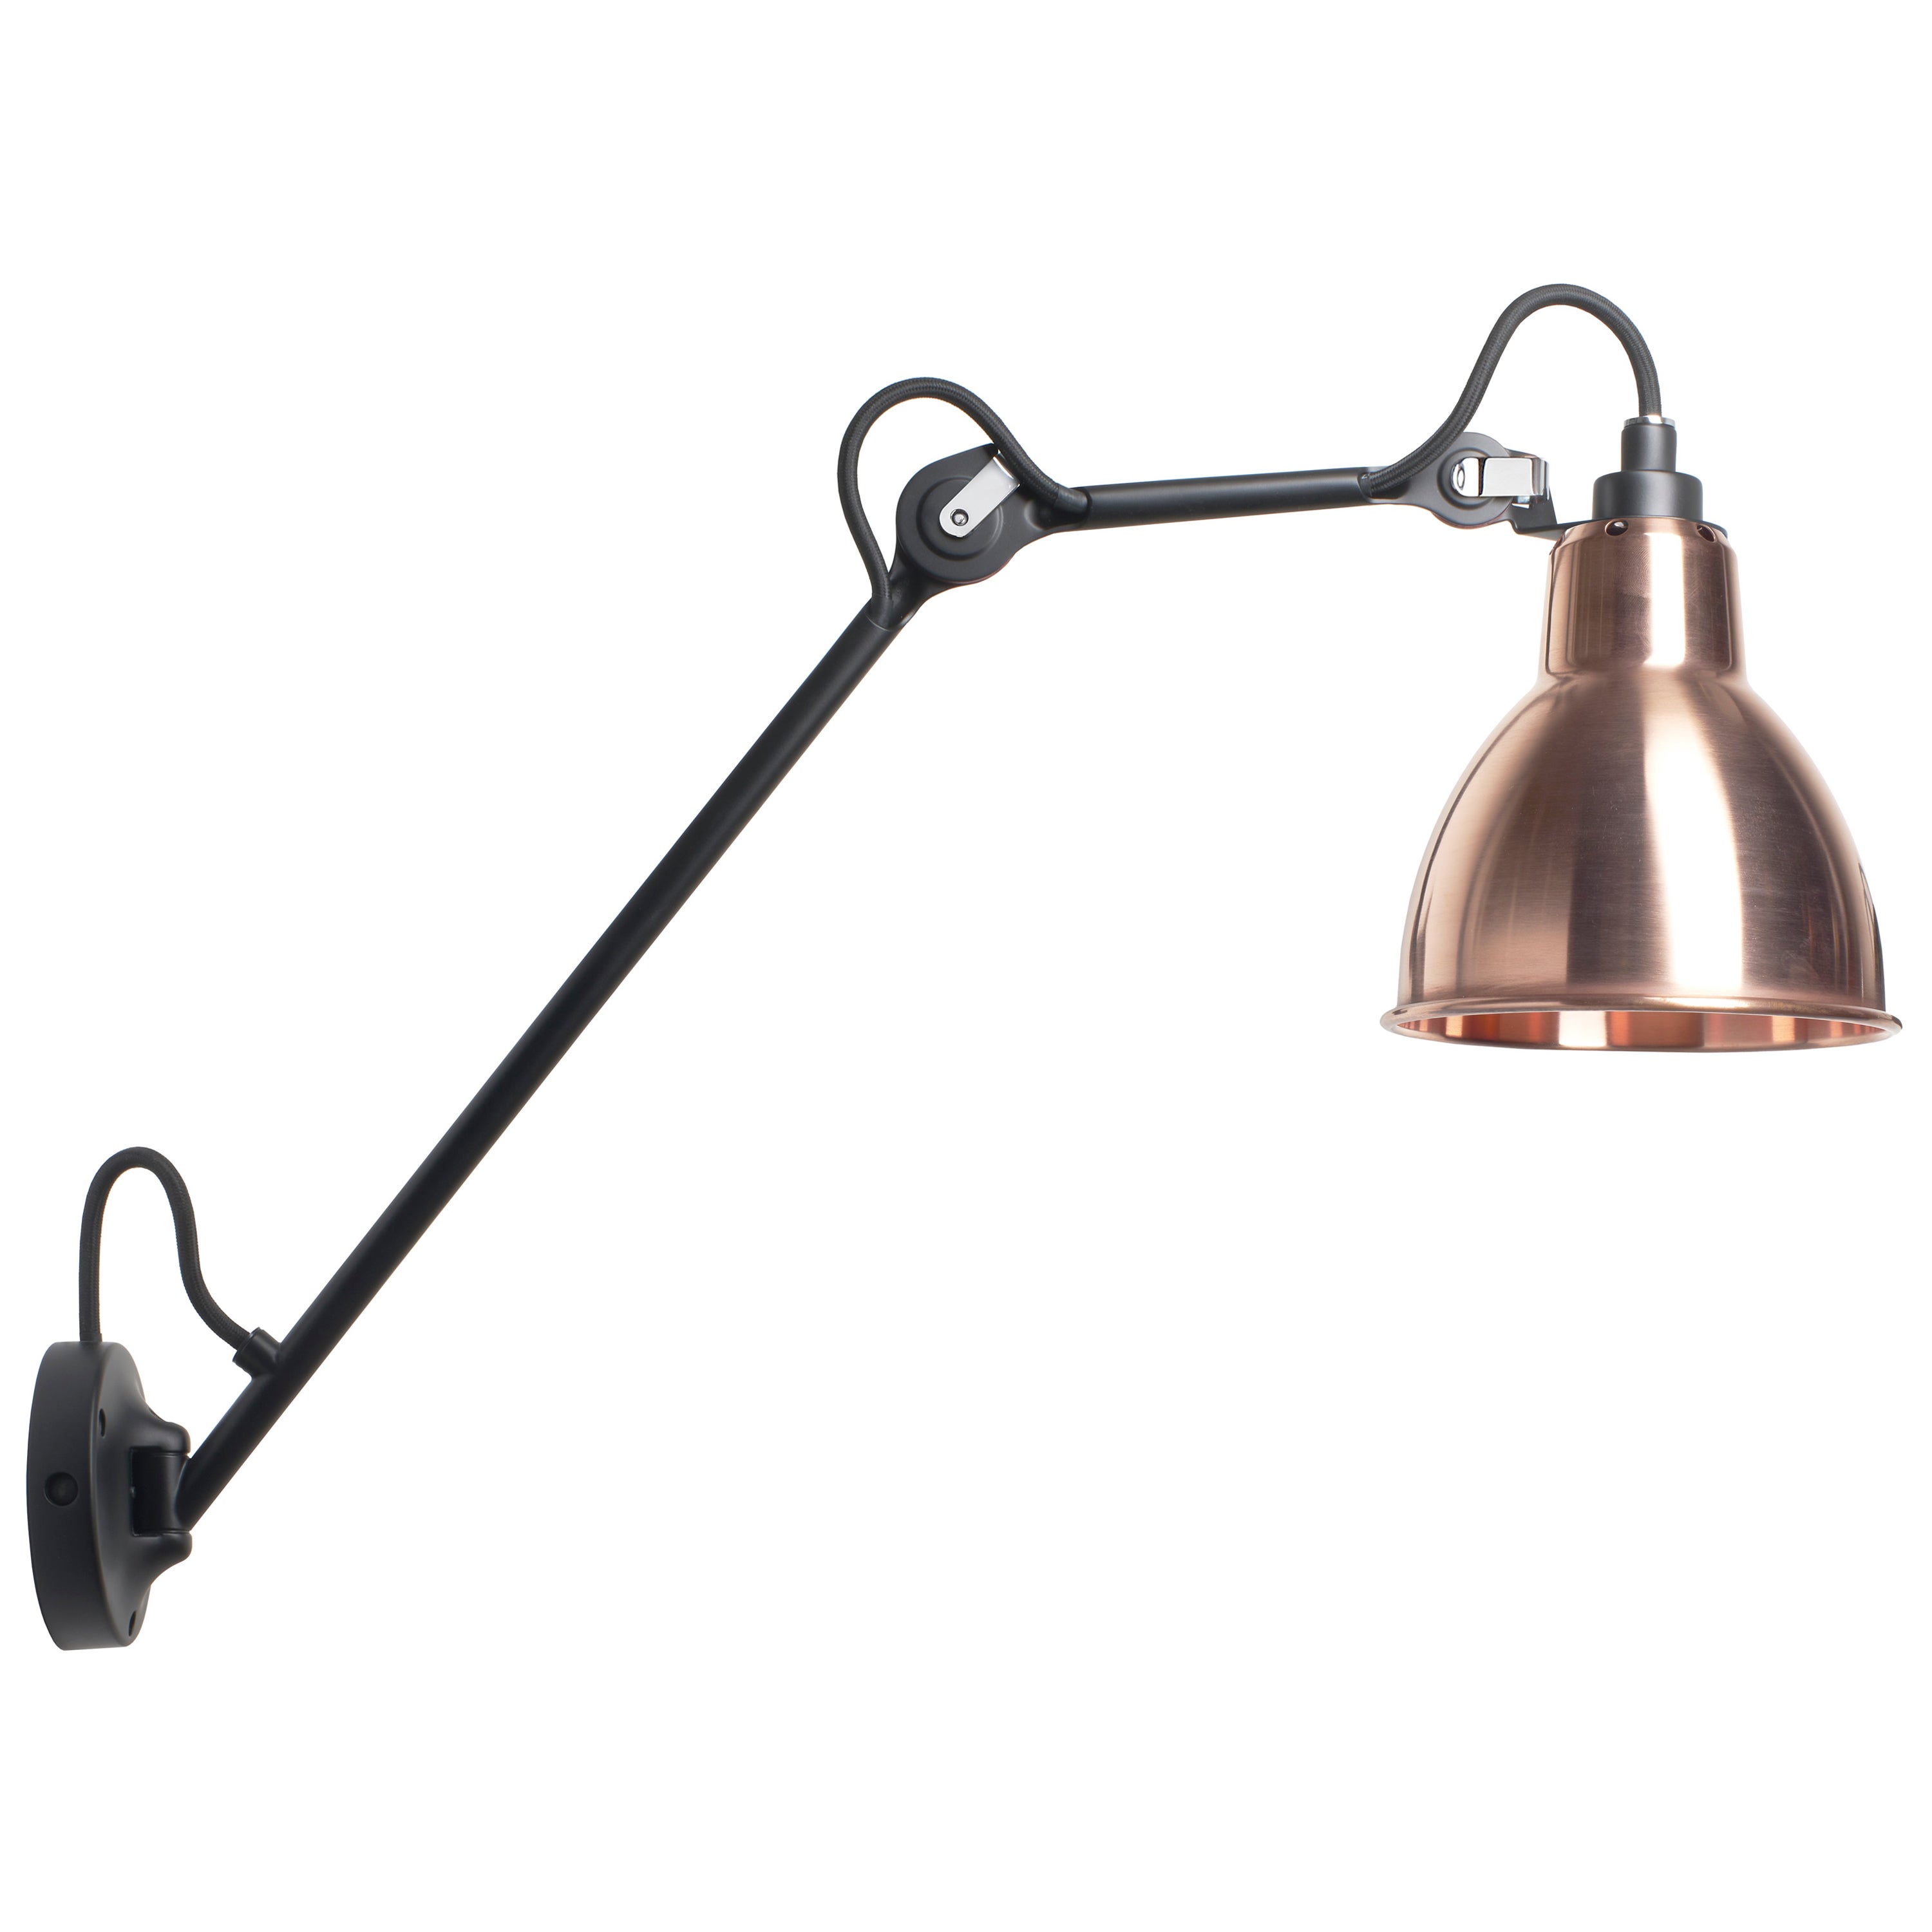 DCW Editions La Lampe Gras N°122 Wall Lamp in Black Arm and Raw Copper Shade For Sale